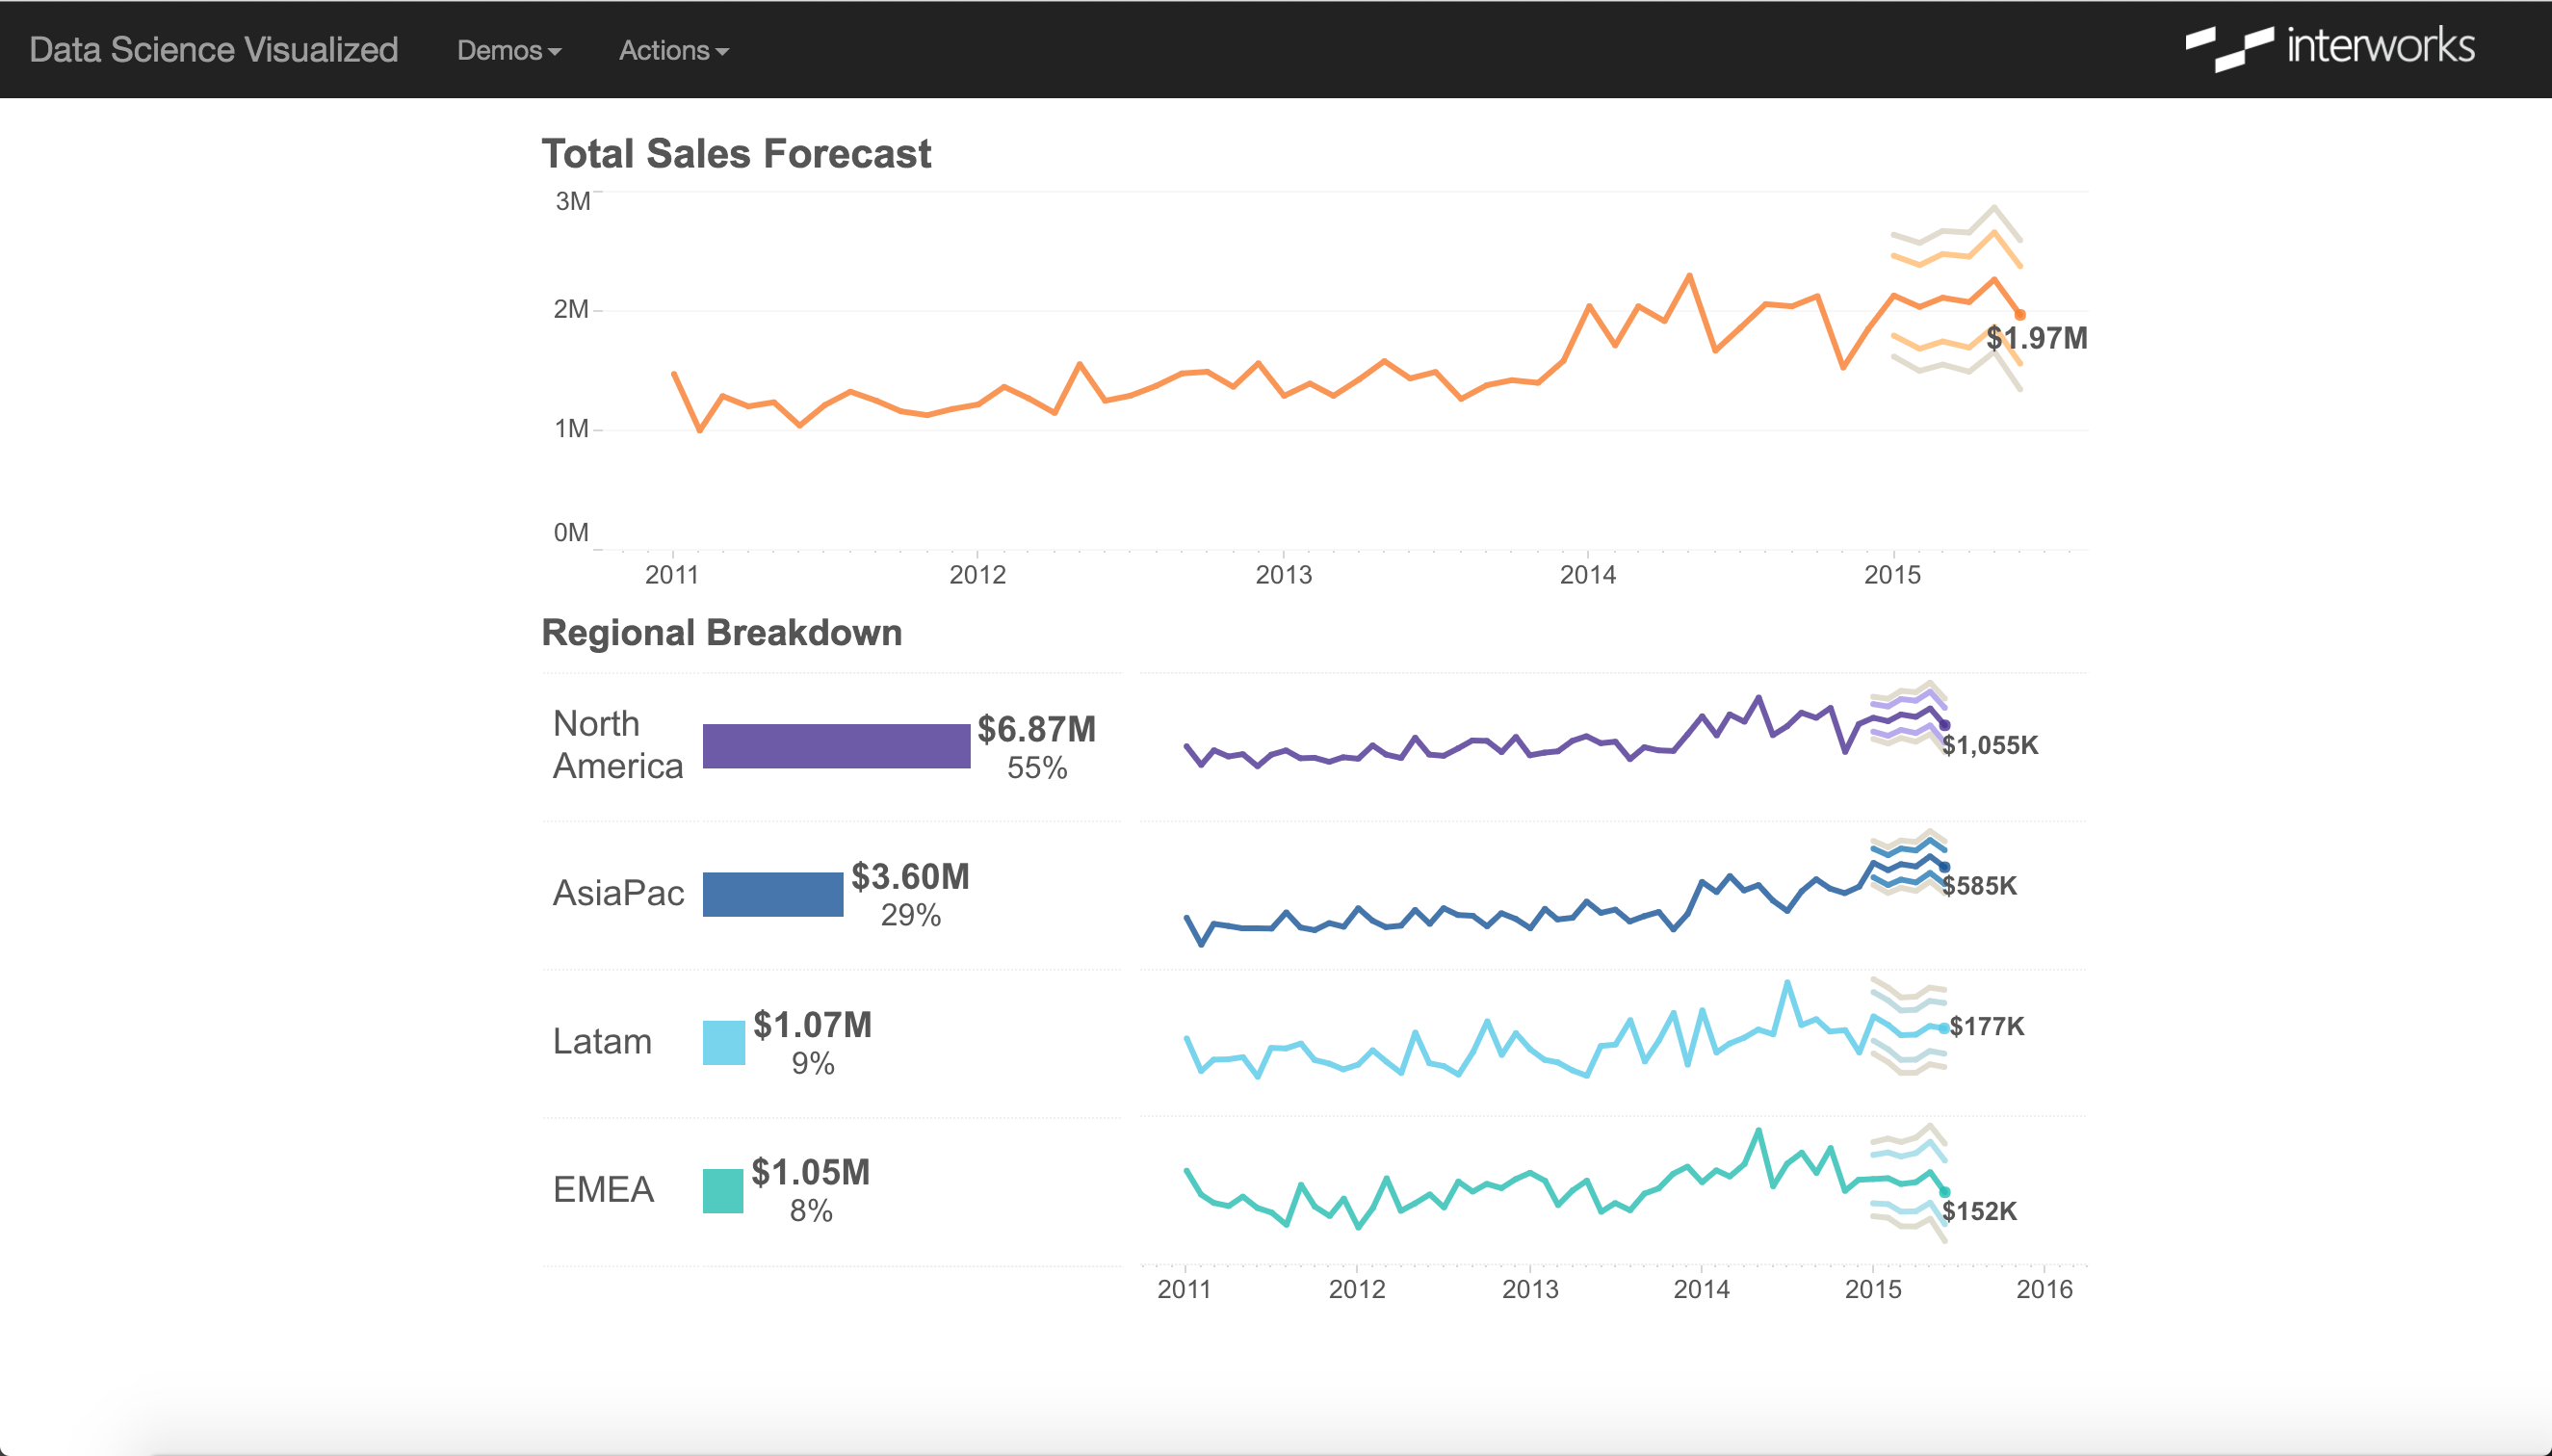 Data Science Visualized: Sales Forecast